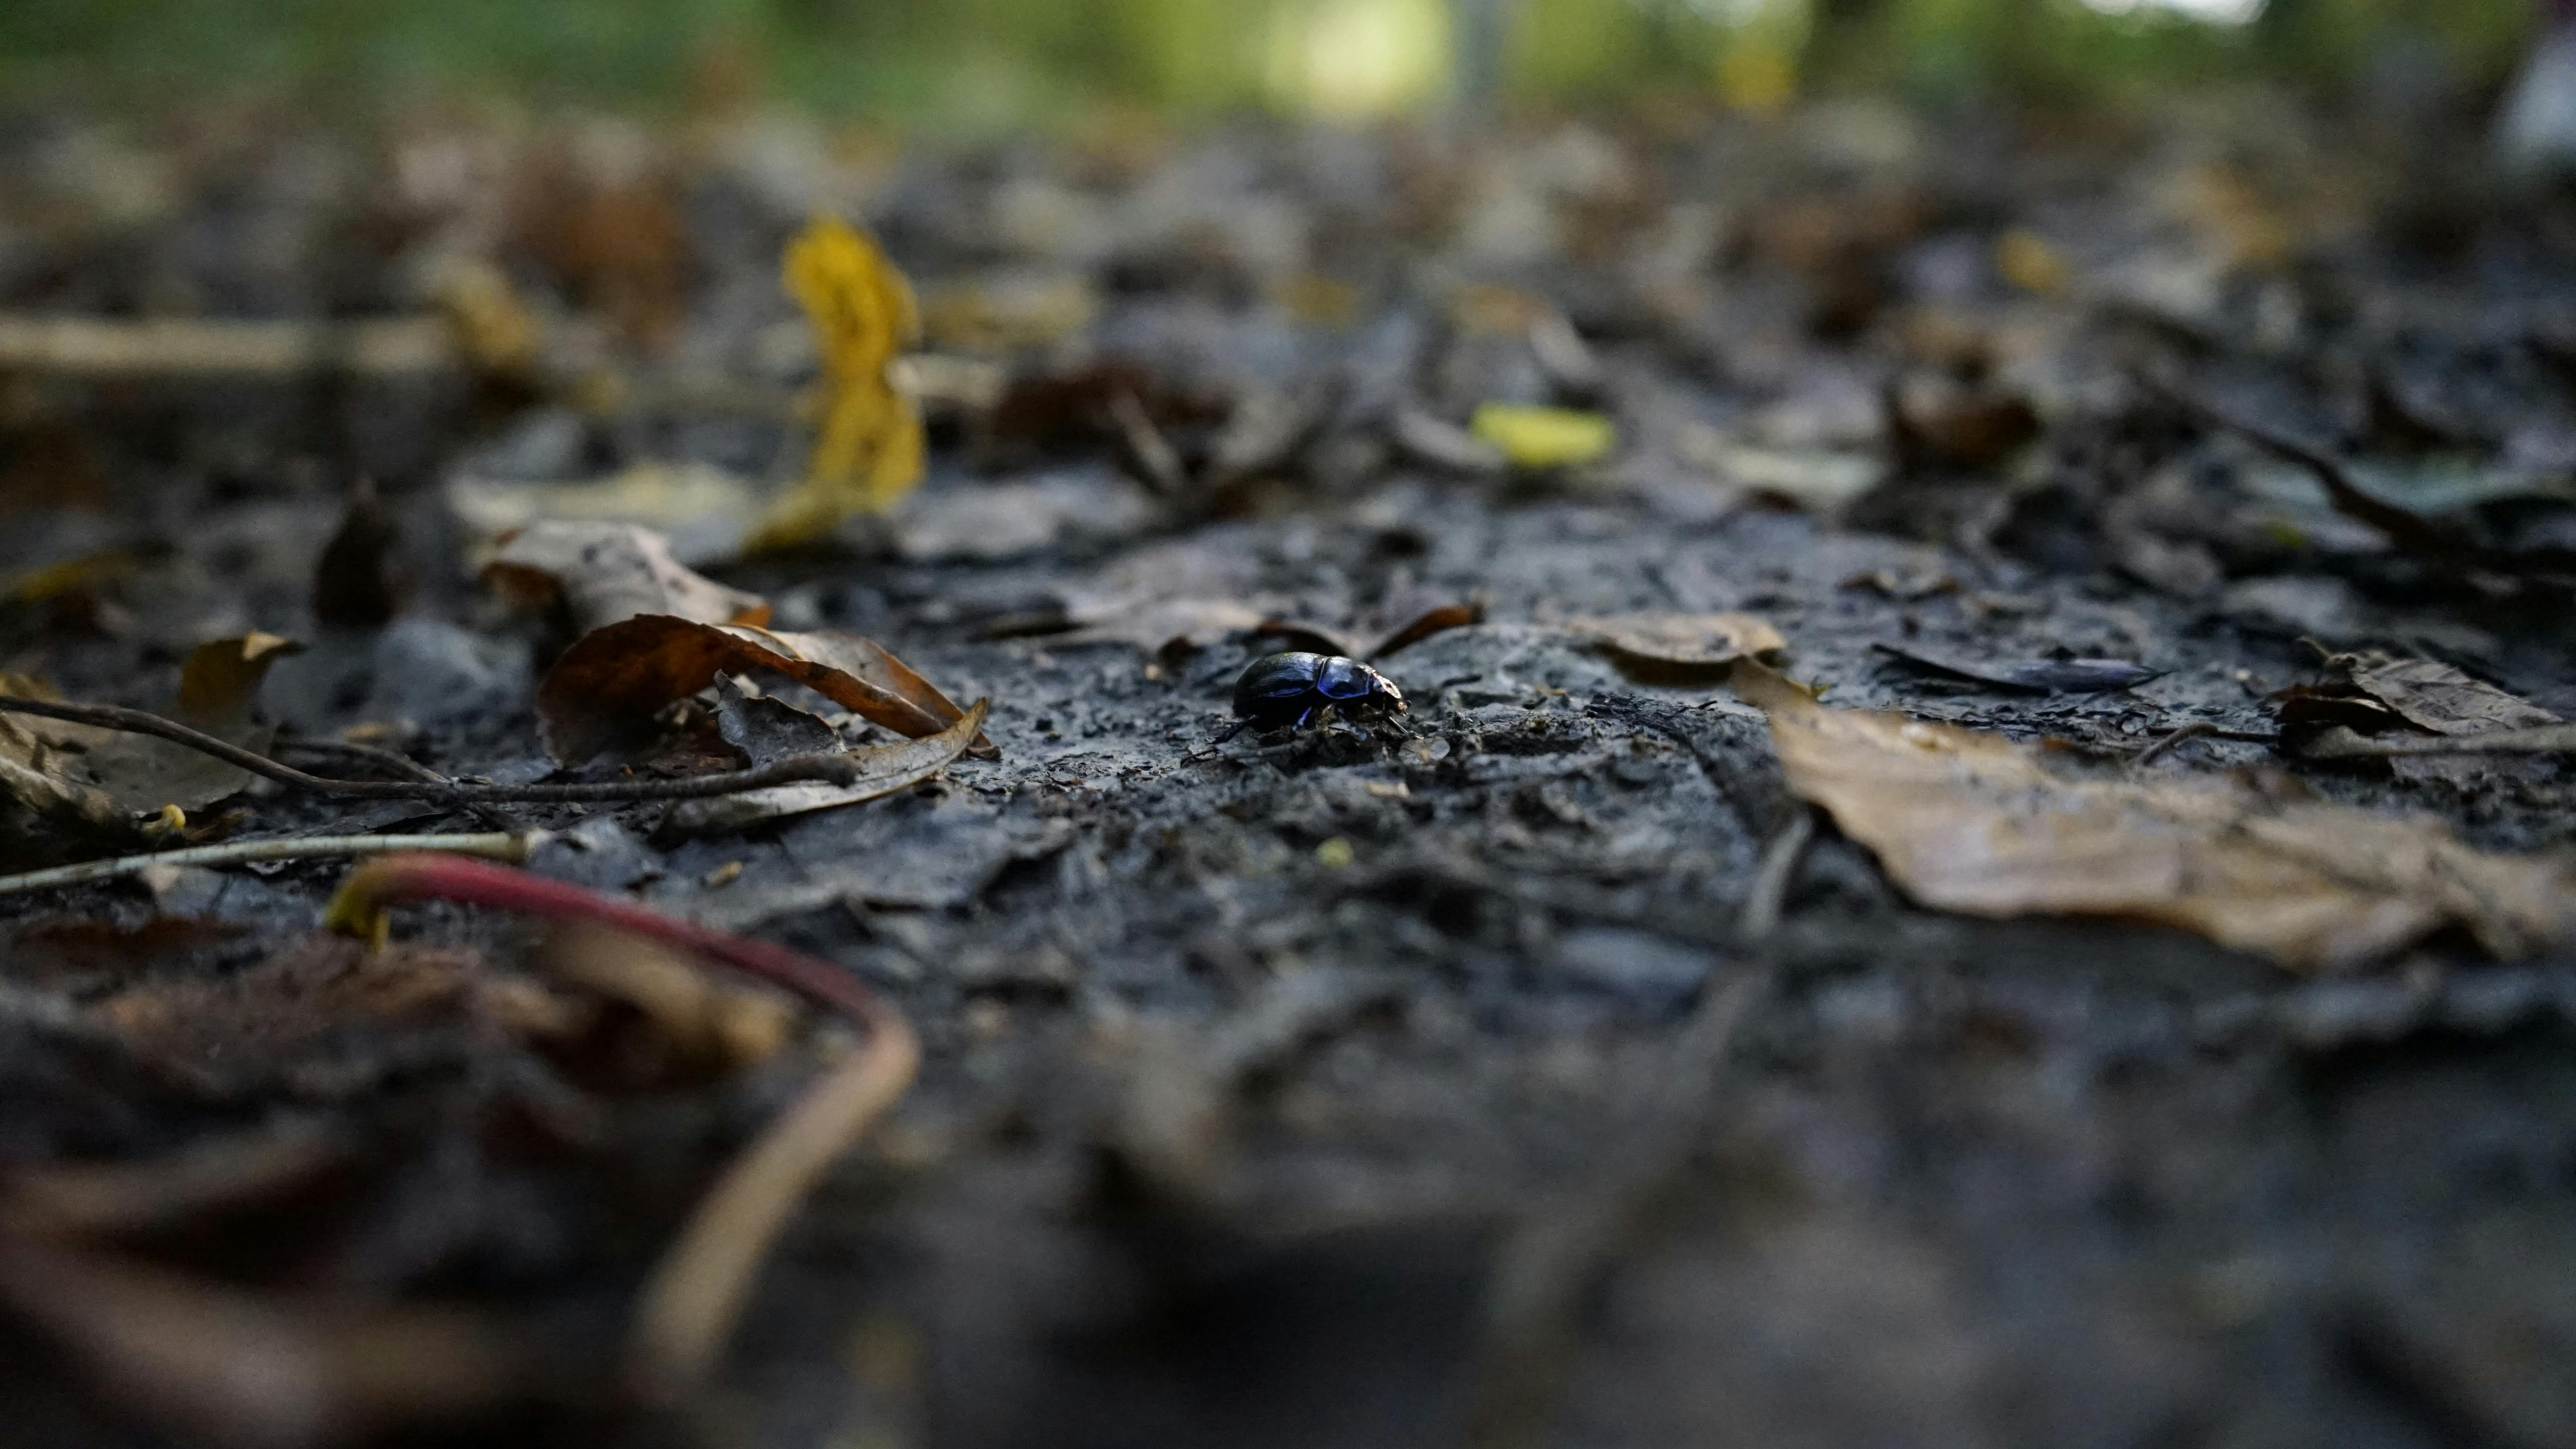 Free stock photo of Alone in the leaf Graveyard, forest, insect